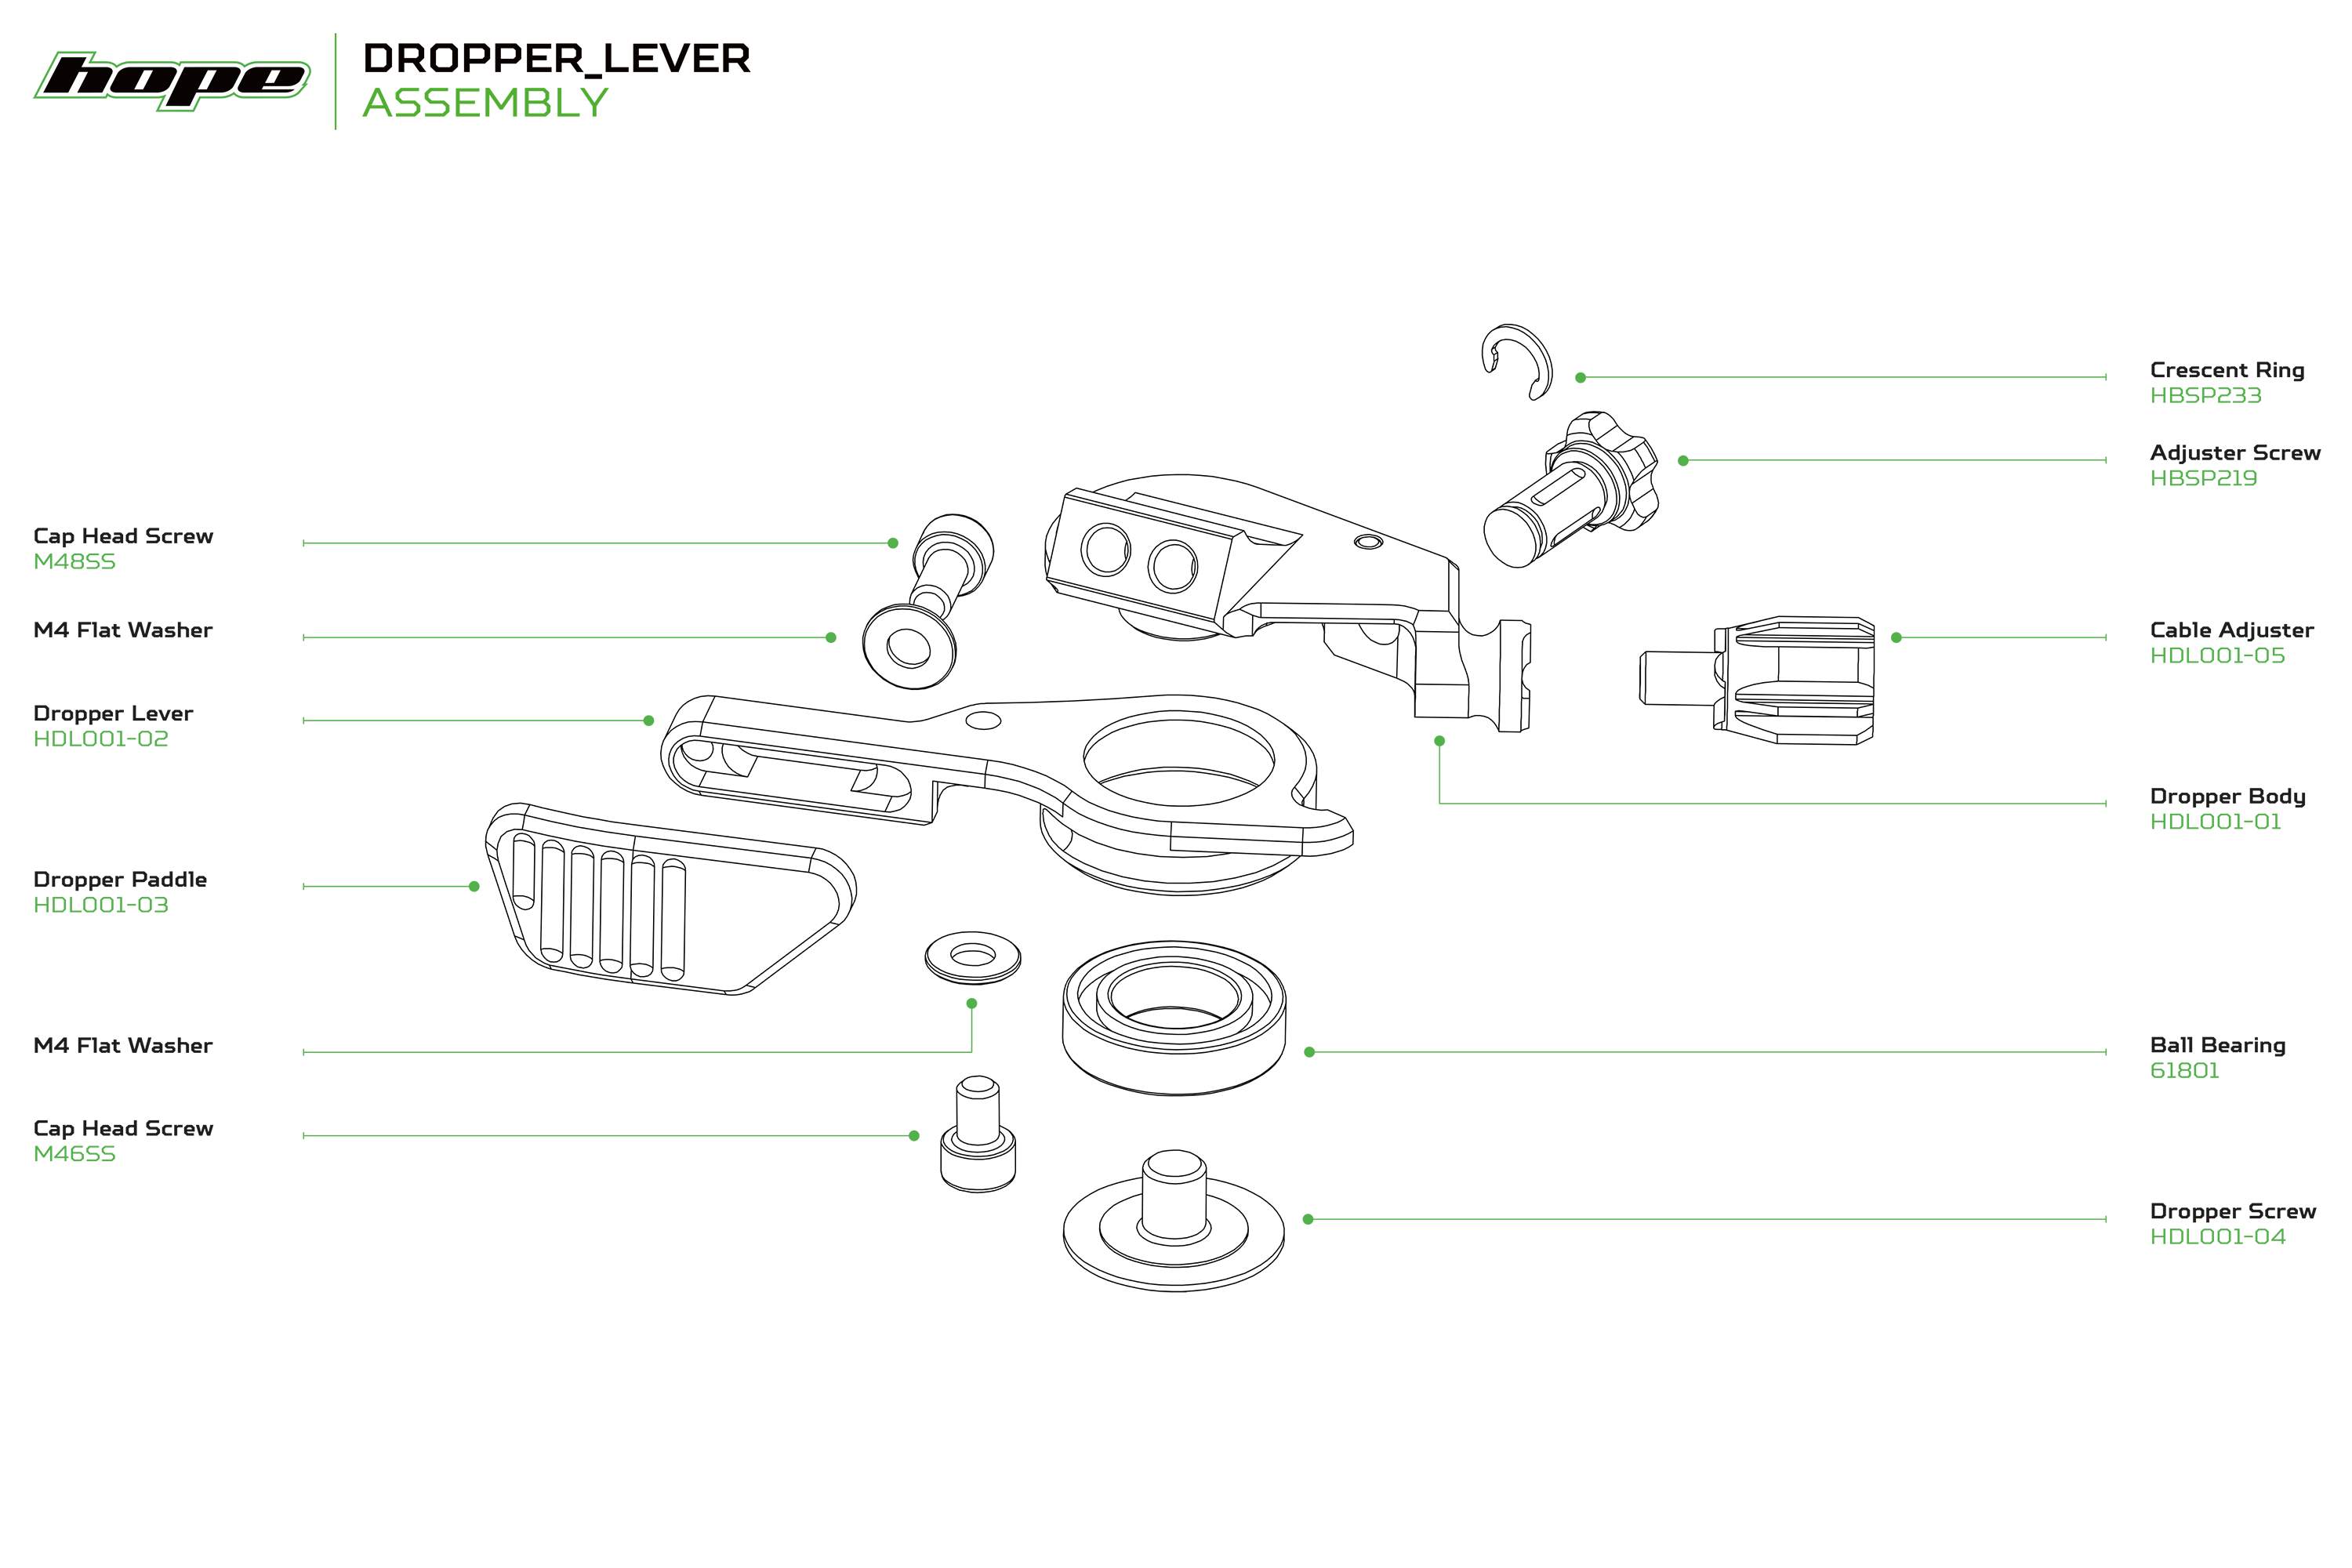 hope_Dropper_Lever_exploded